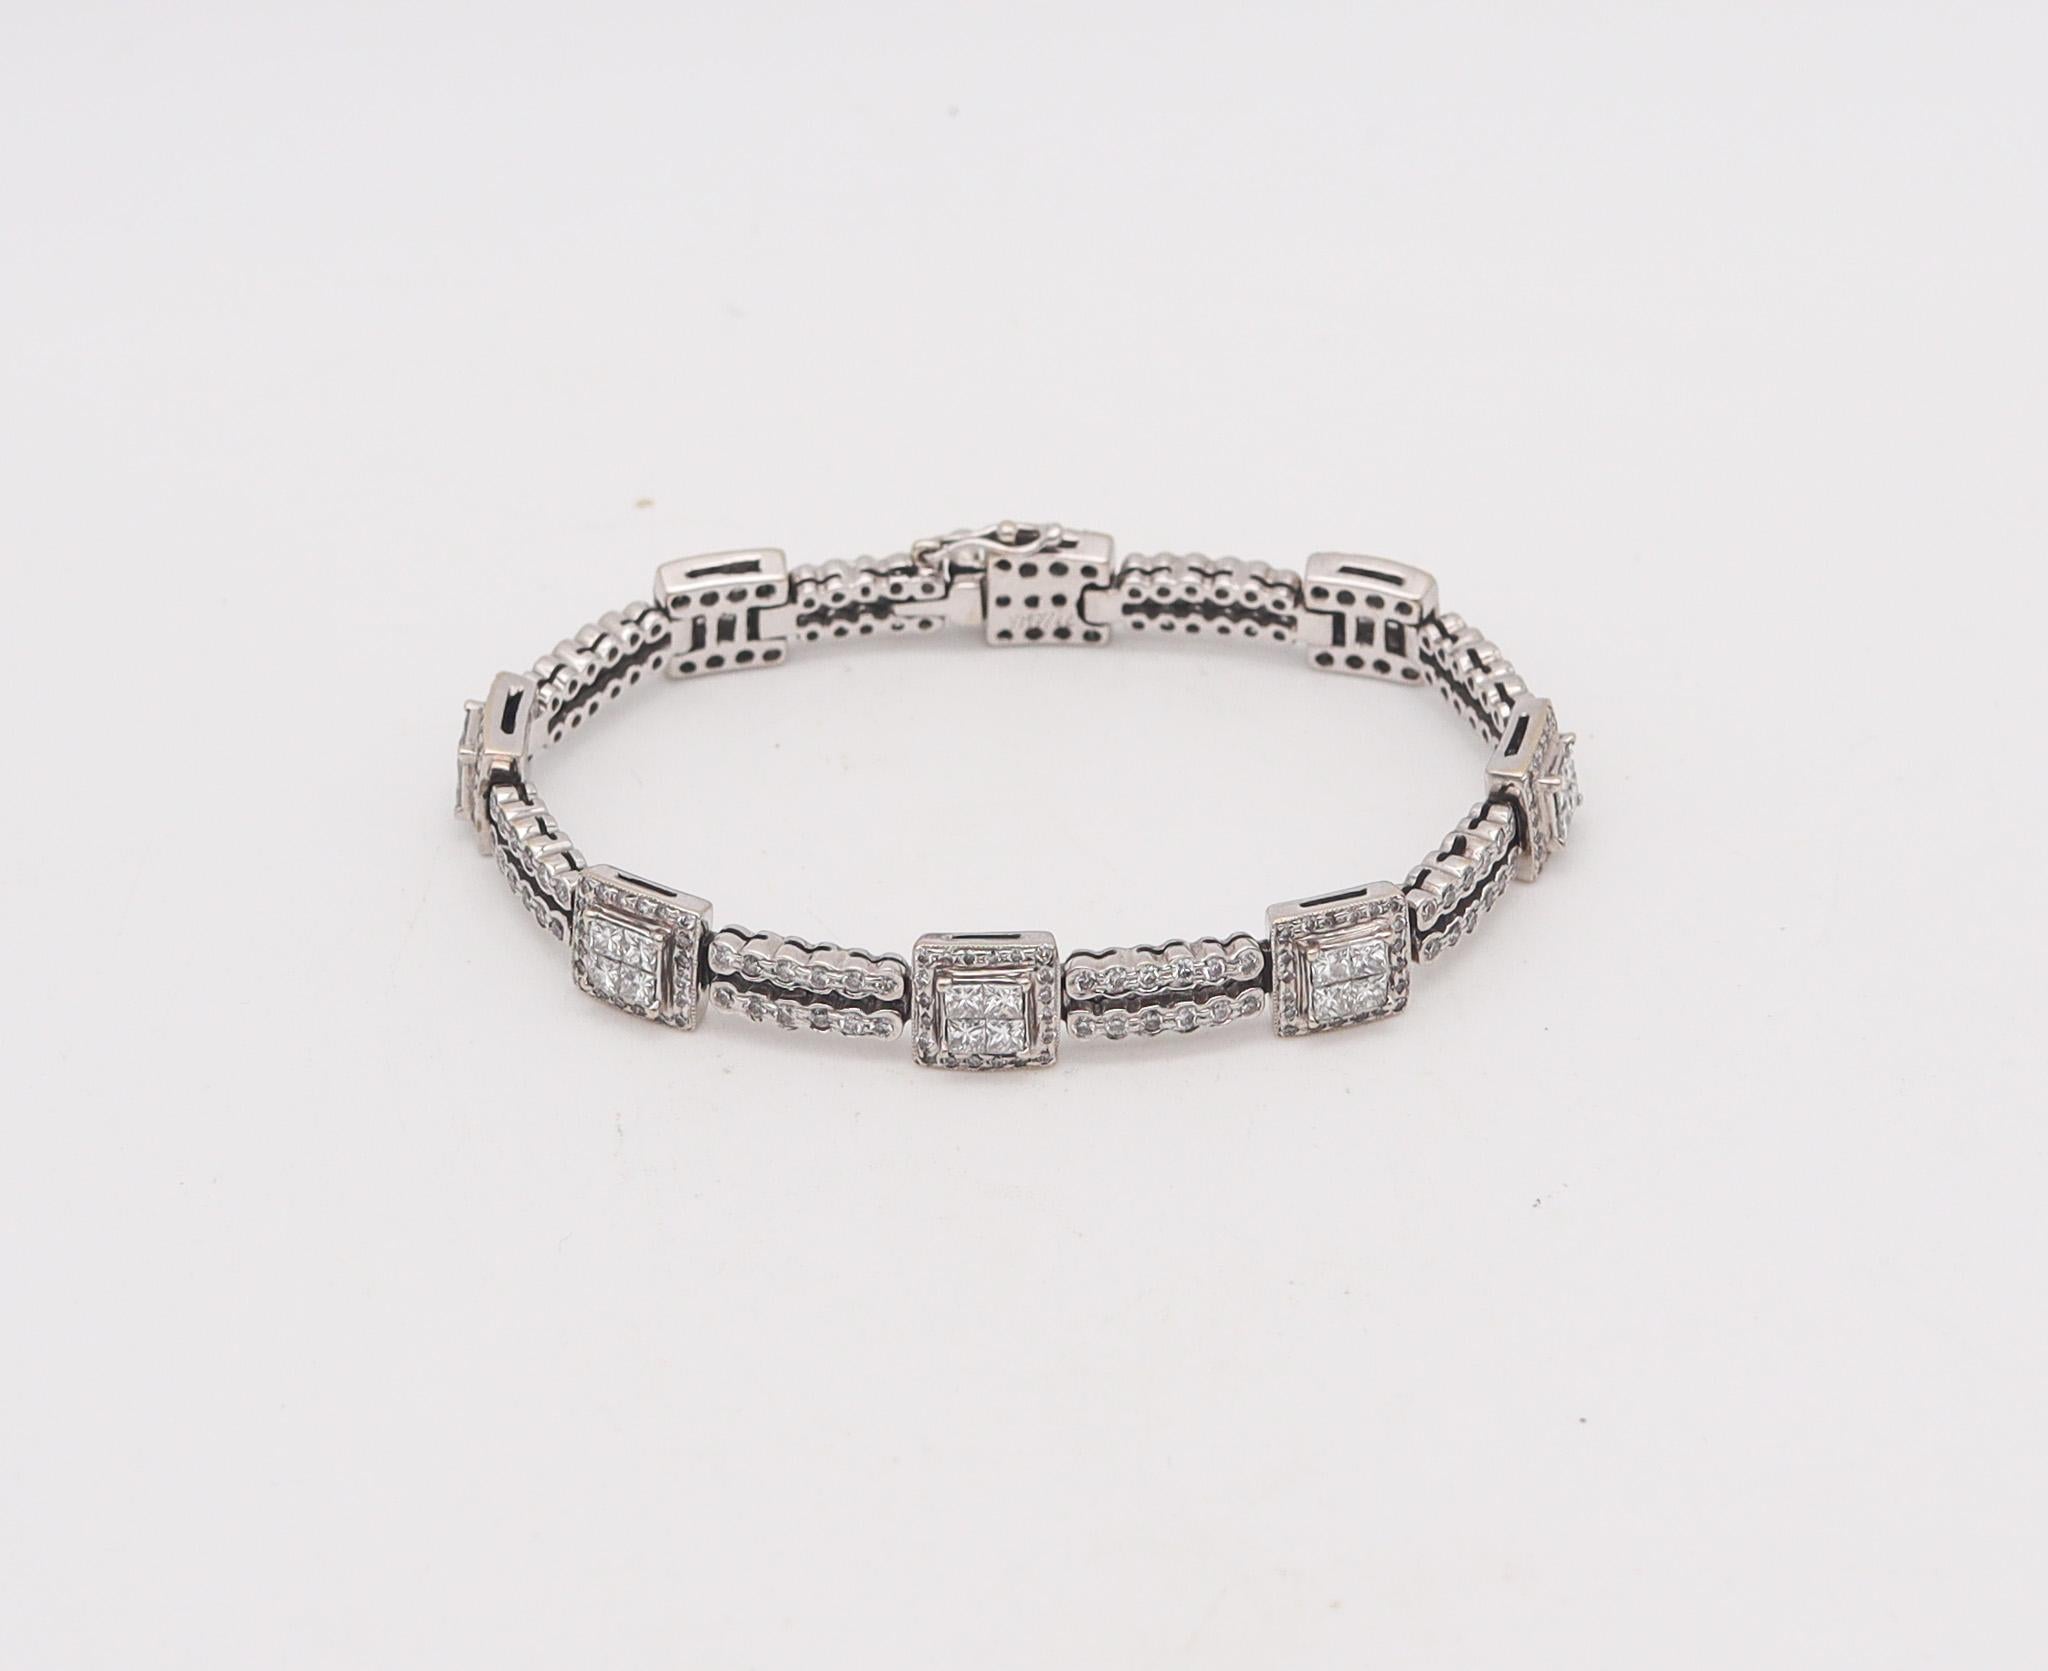 Brilliant Cut Italian Modernist Station Bracelet In 18Kt White Gold With 7.44 Ctw In Diamonds For Sale